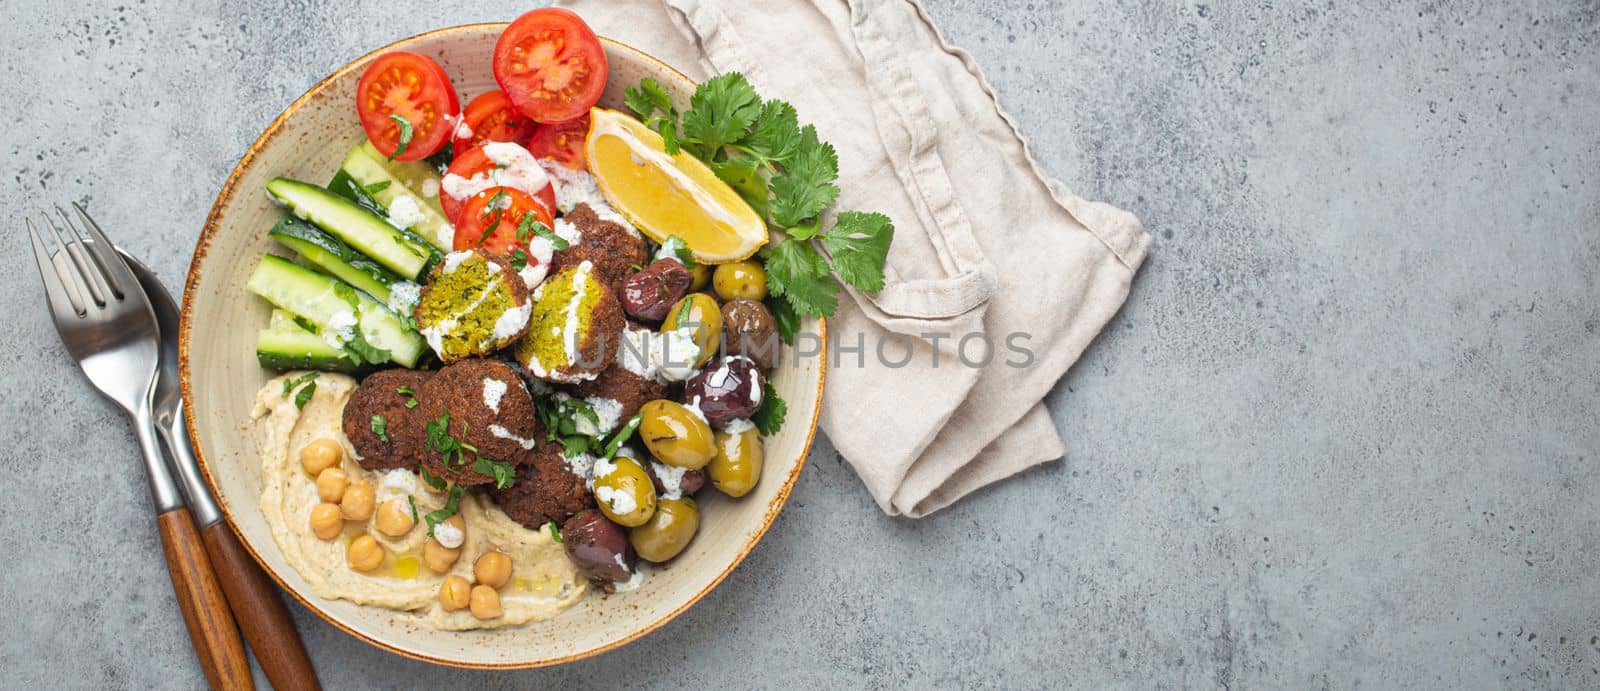 Falafel salad bowl with hummus, vegetables, olives, herbs and yogurt sauce. Vegan lunch plate top view on rustic stone background, healthy meal with falafel and veggies, copy space by its_al_dente